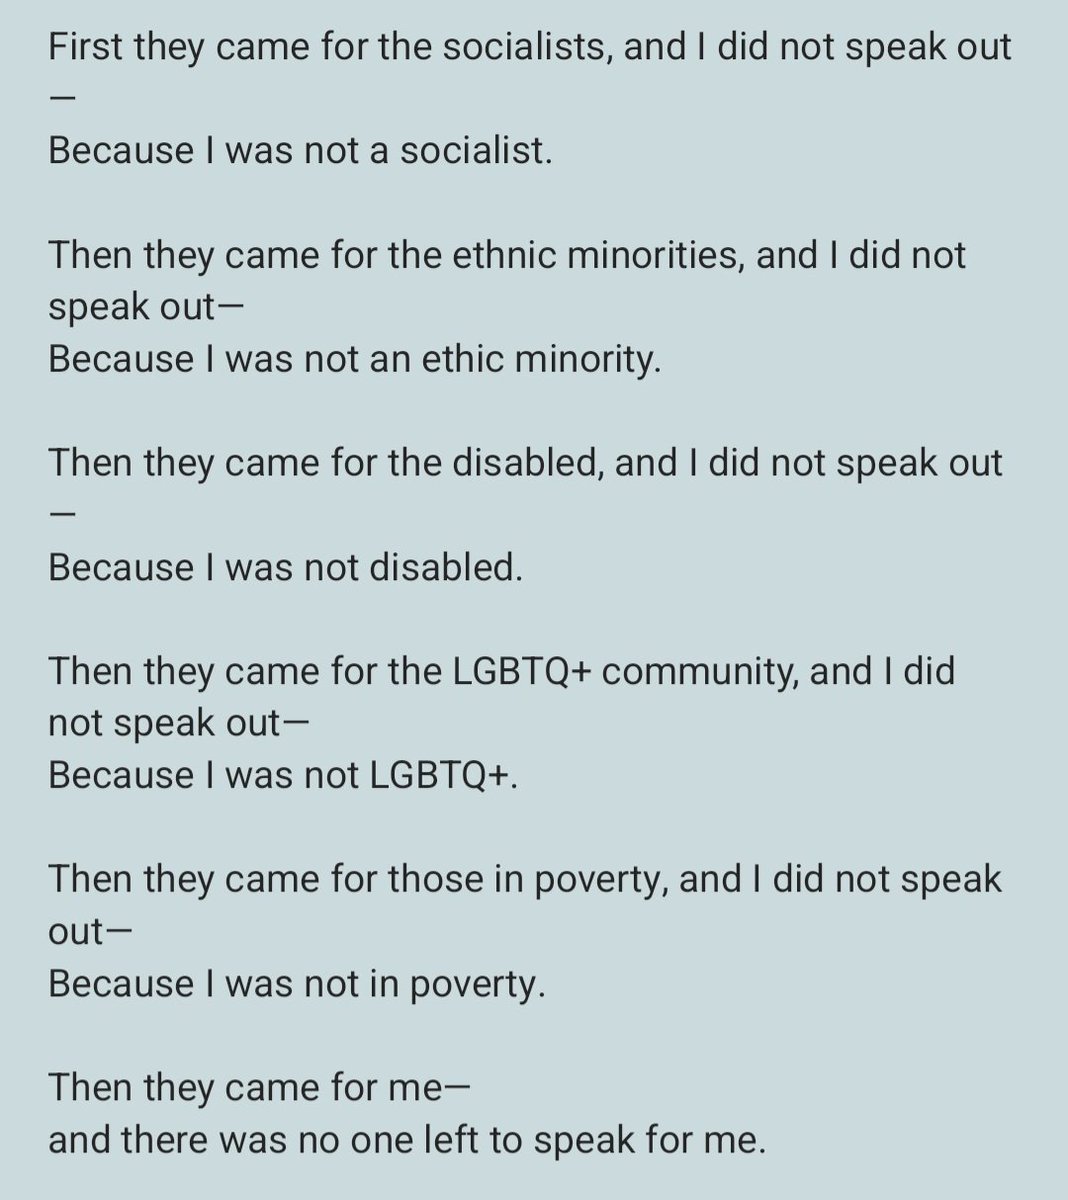 A twist on 'First They Came' by Pastor Martin Niemöller 👇🏼